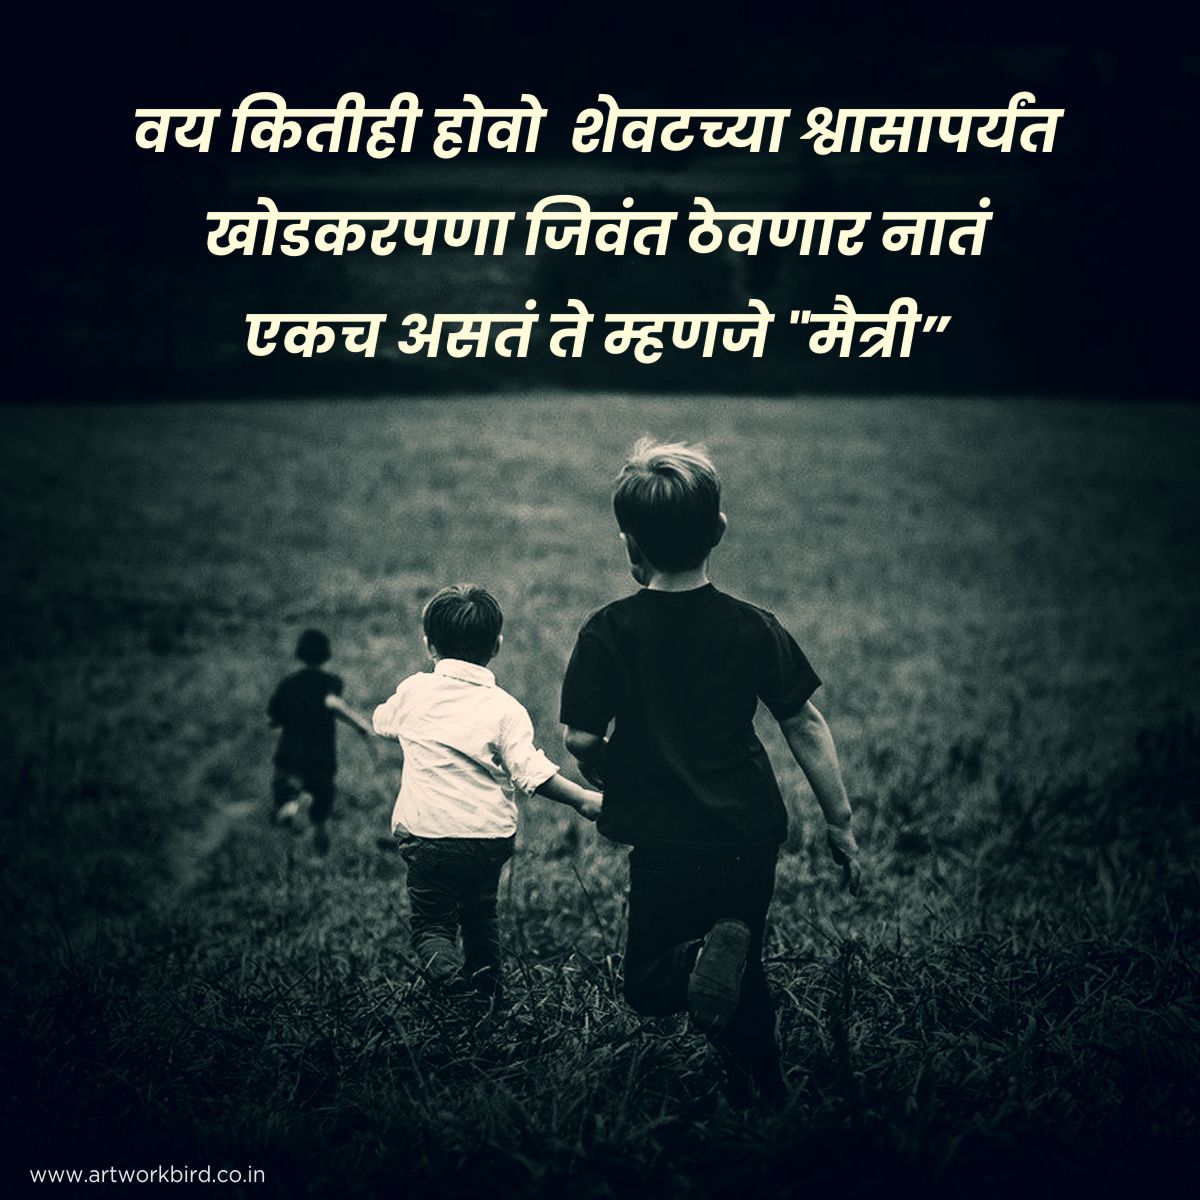 friendship quotes in marathi with images